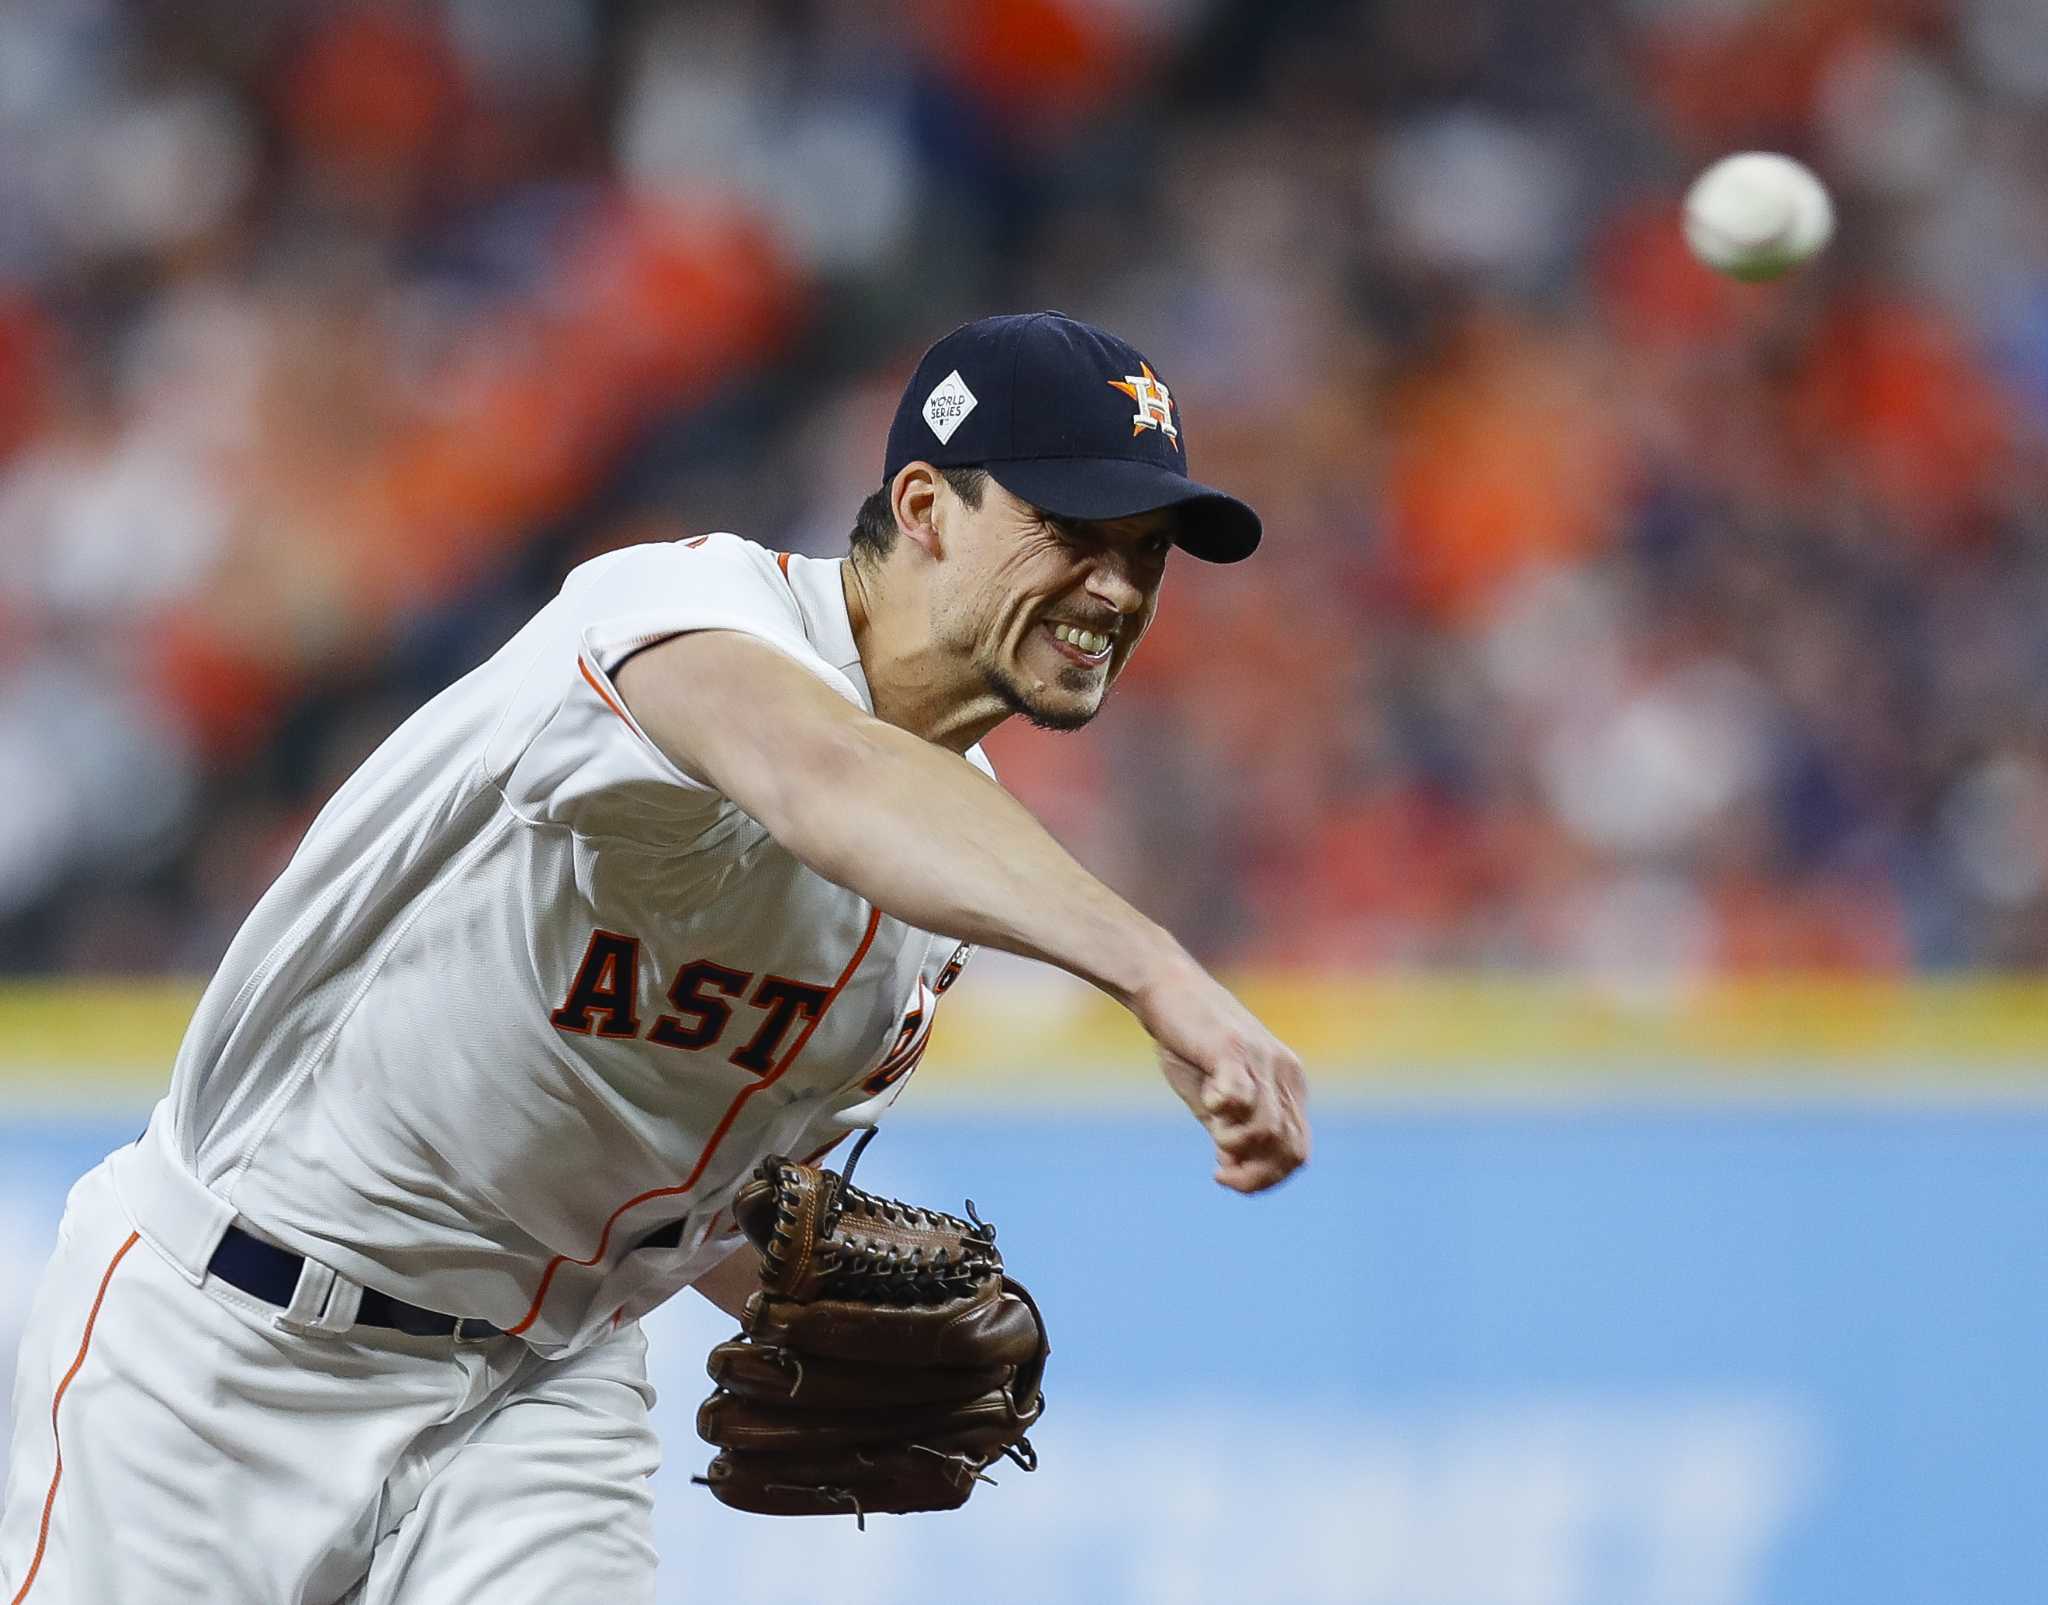 Phillies pitcher Charlie Morton solid in start against Astros – The